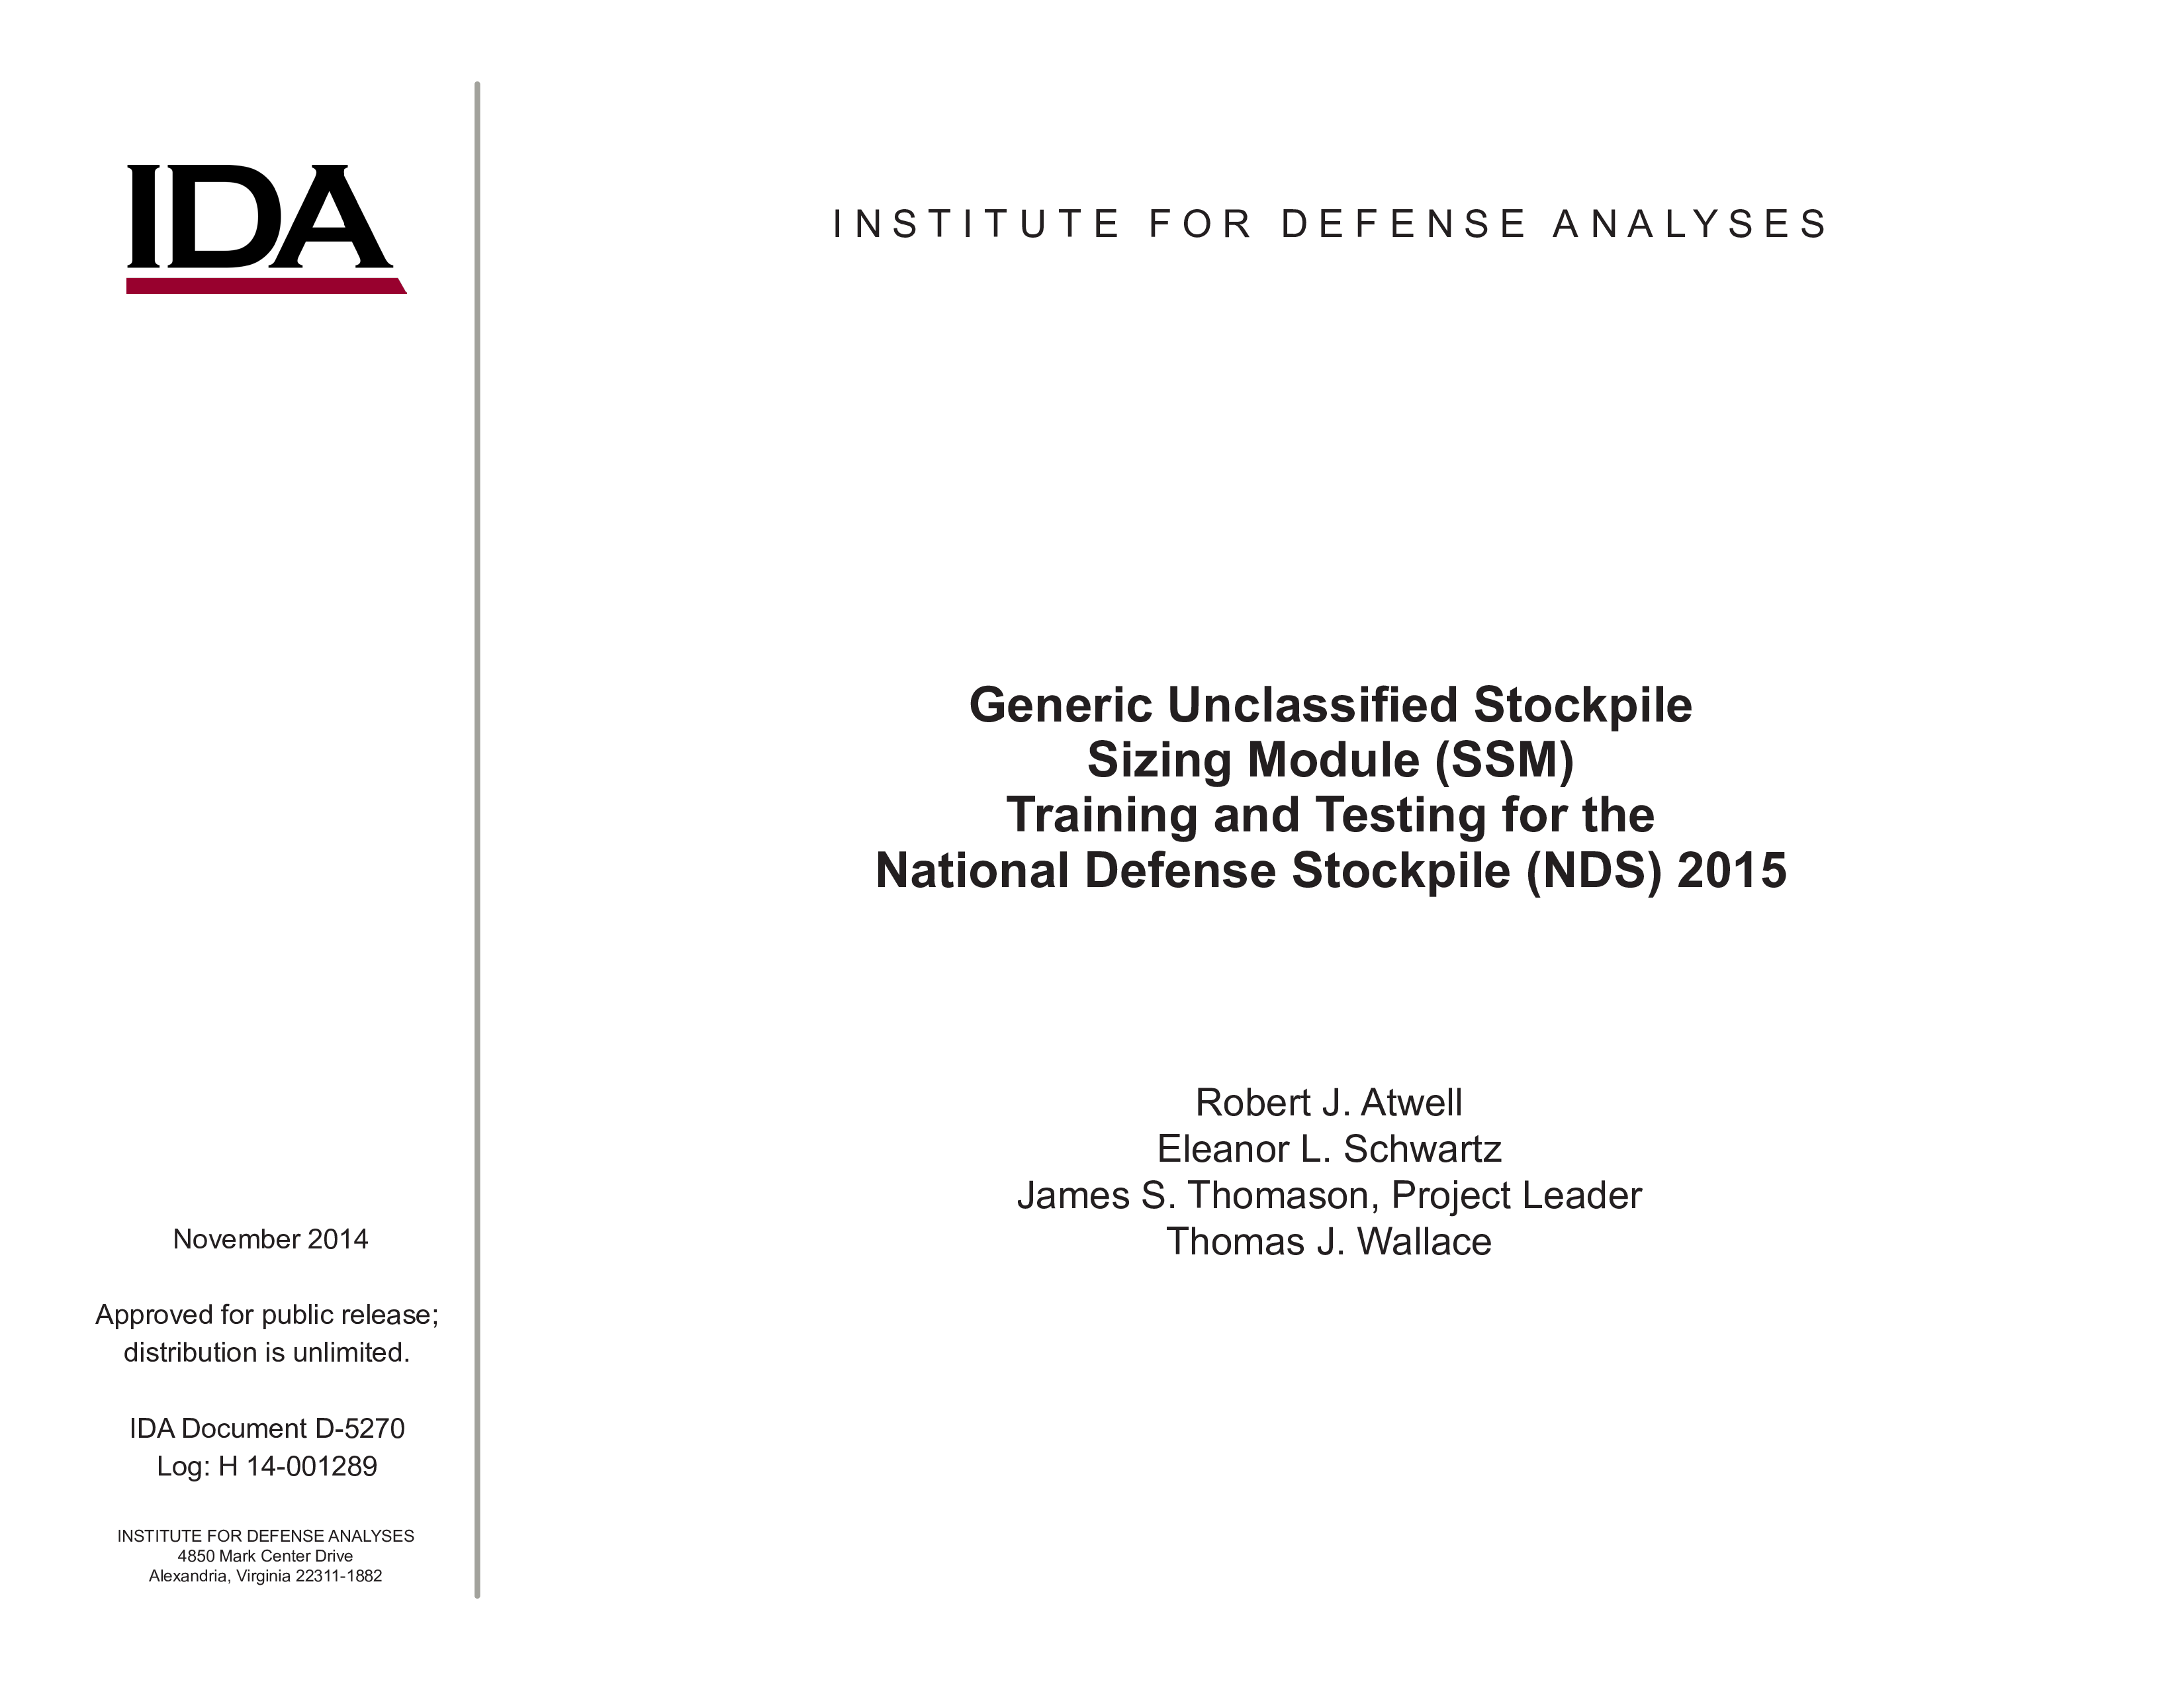 Generic Unclassified Stockpile Sizing Module (SSM) Training and Testing for the National Defense Stockpile (NDS) 2015